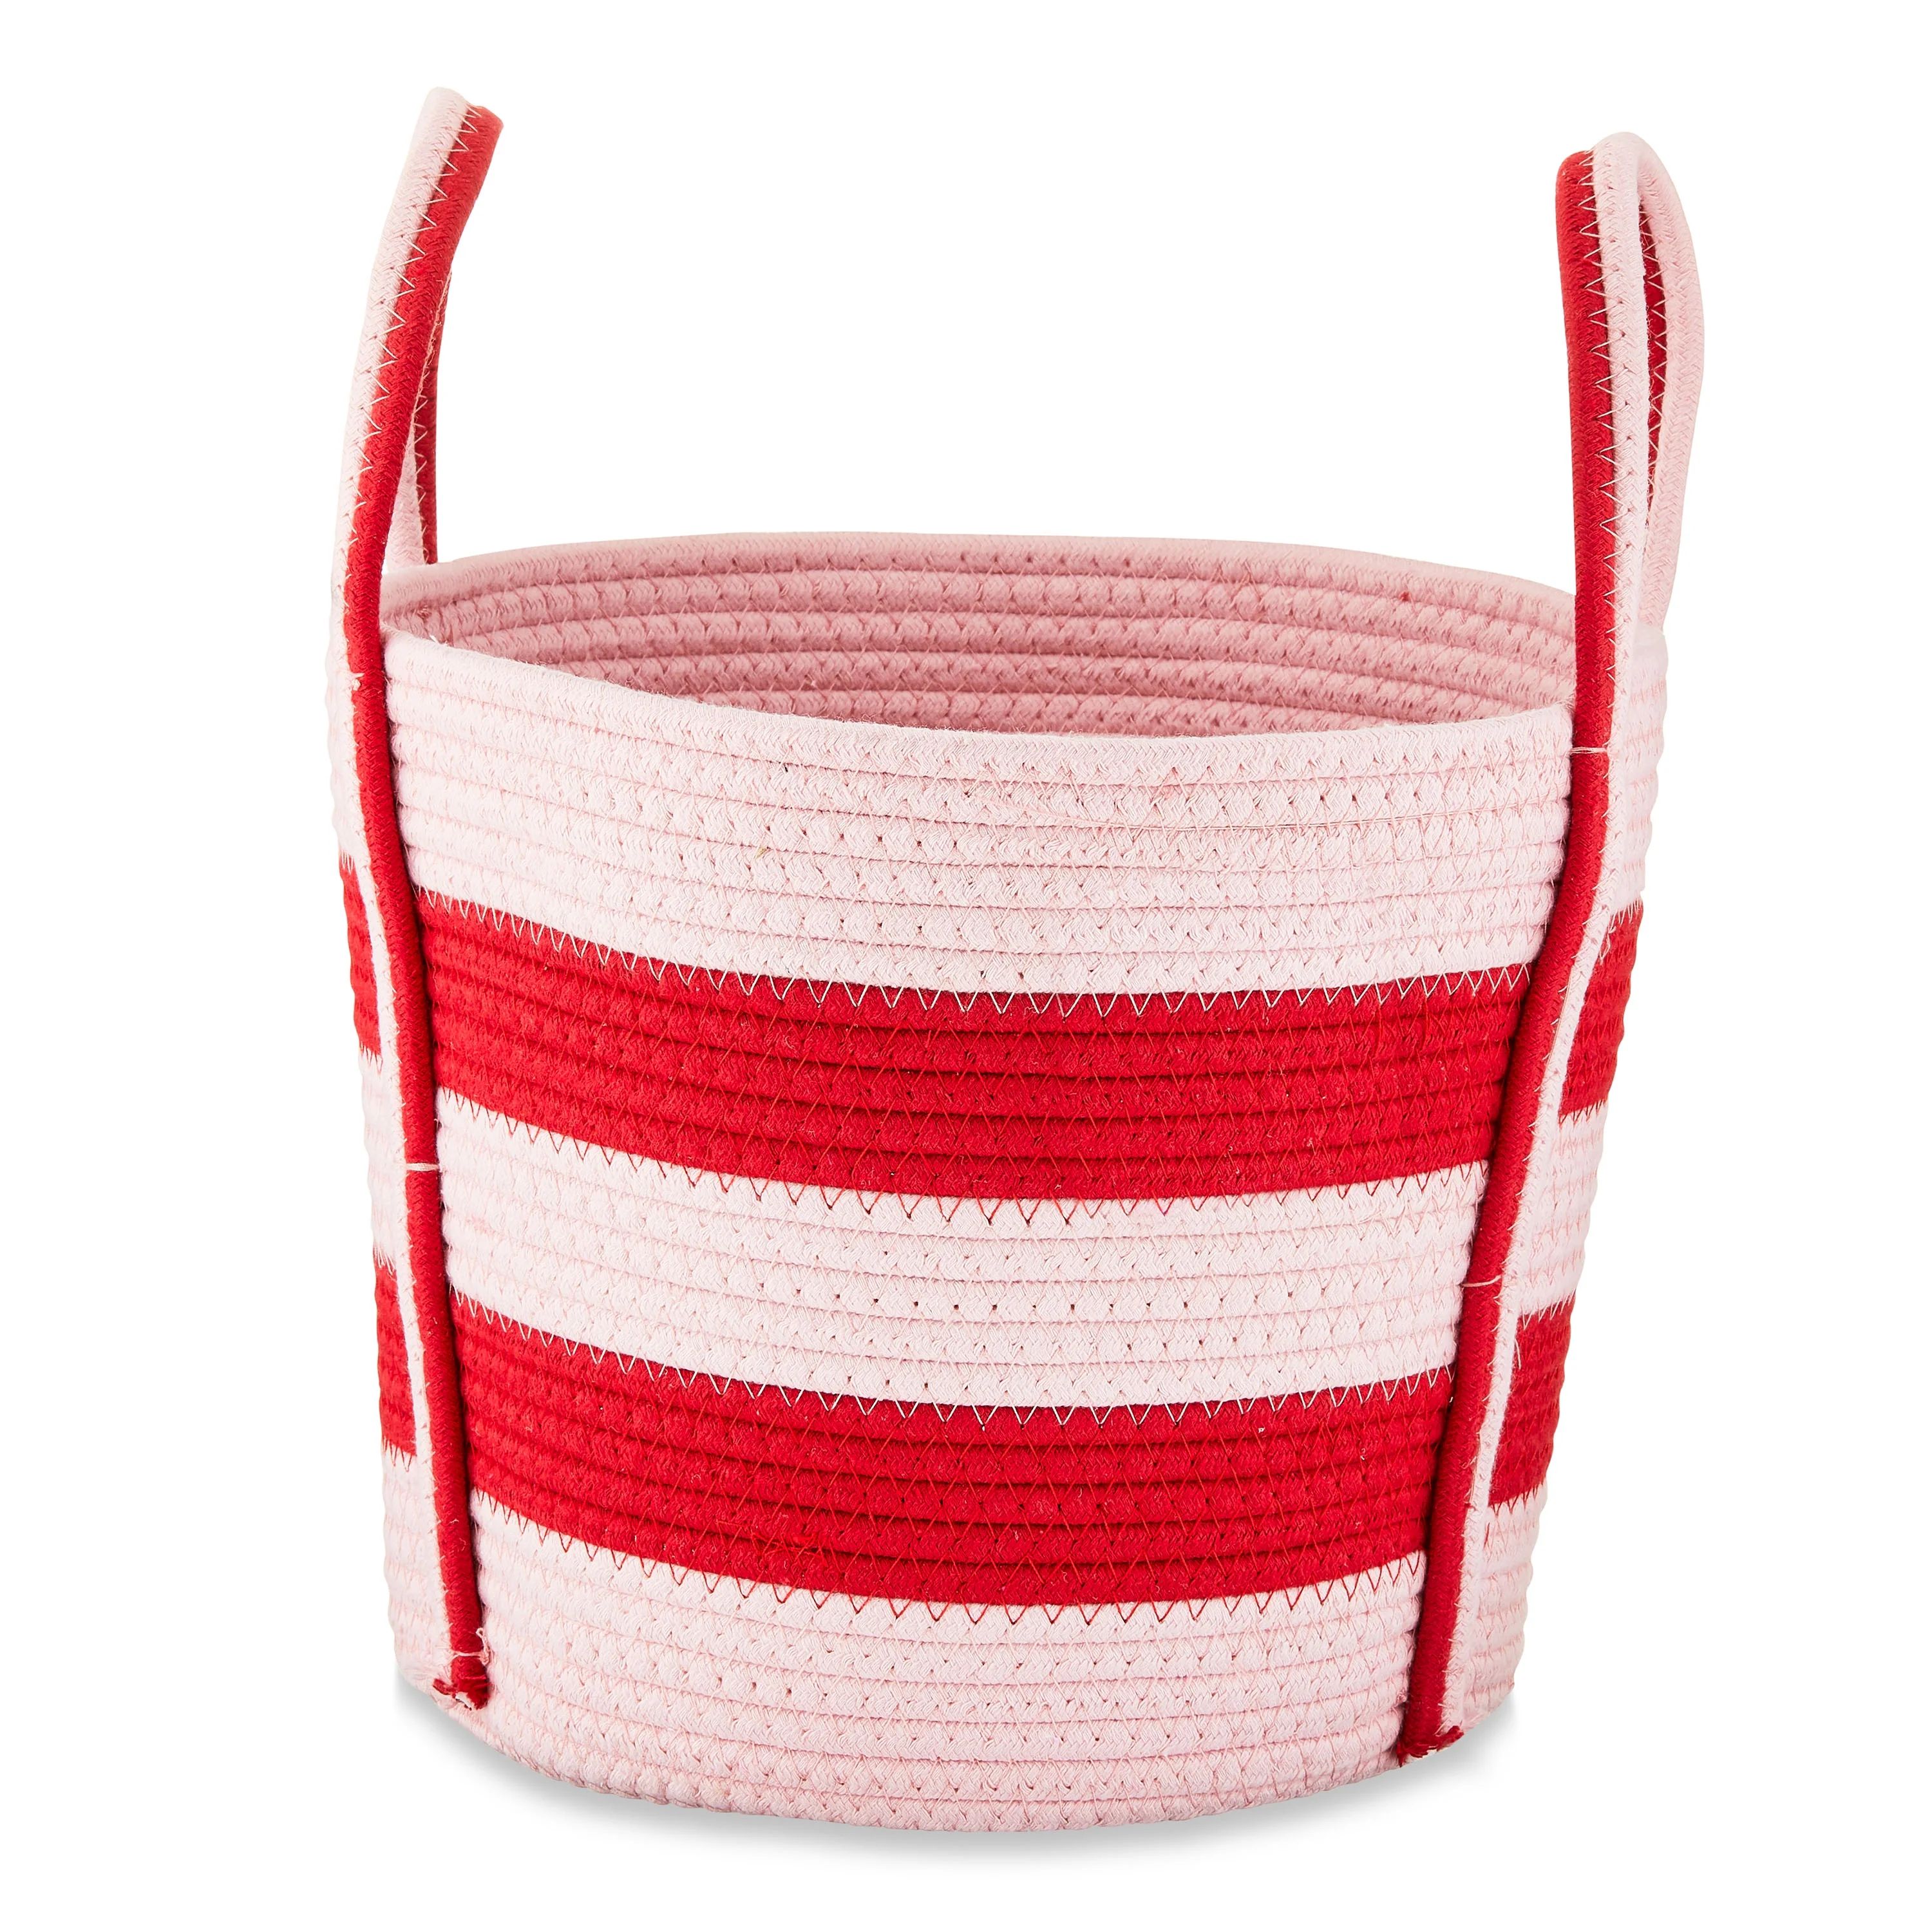 Valentine's Day Cotton Rope Storage Basket with Handle, Red & Pink Stripes, by Way To Celebrate | Walmart (US)